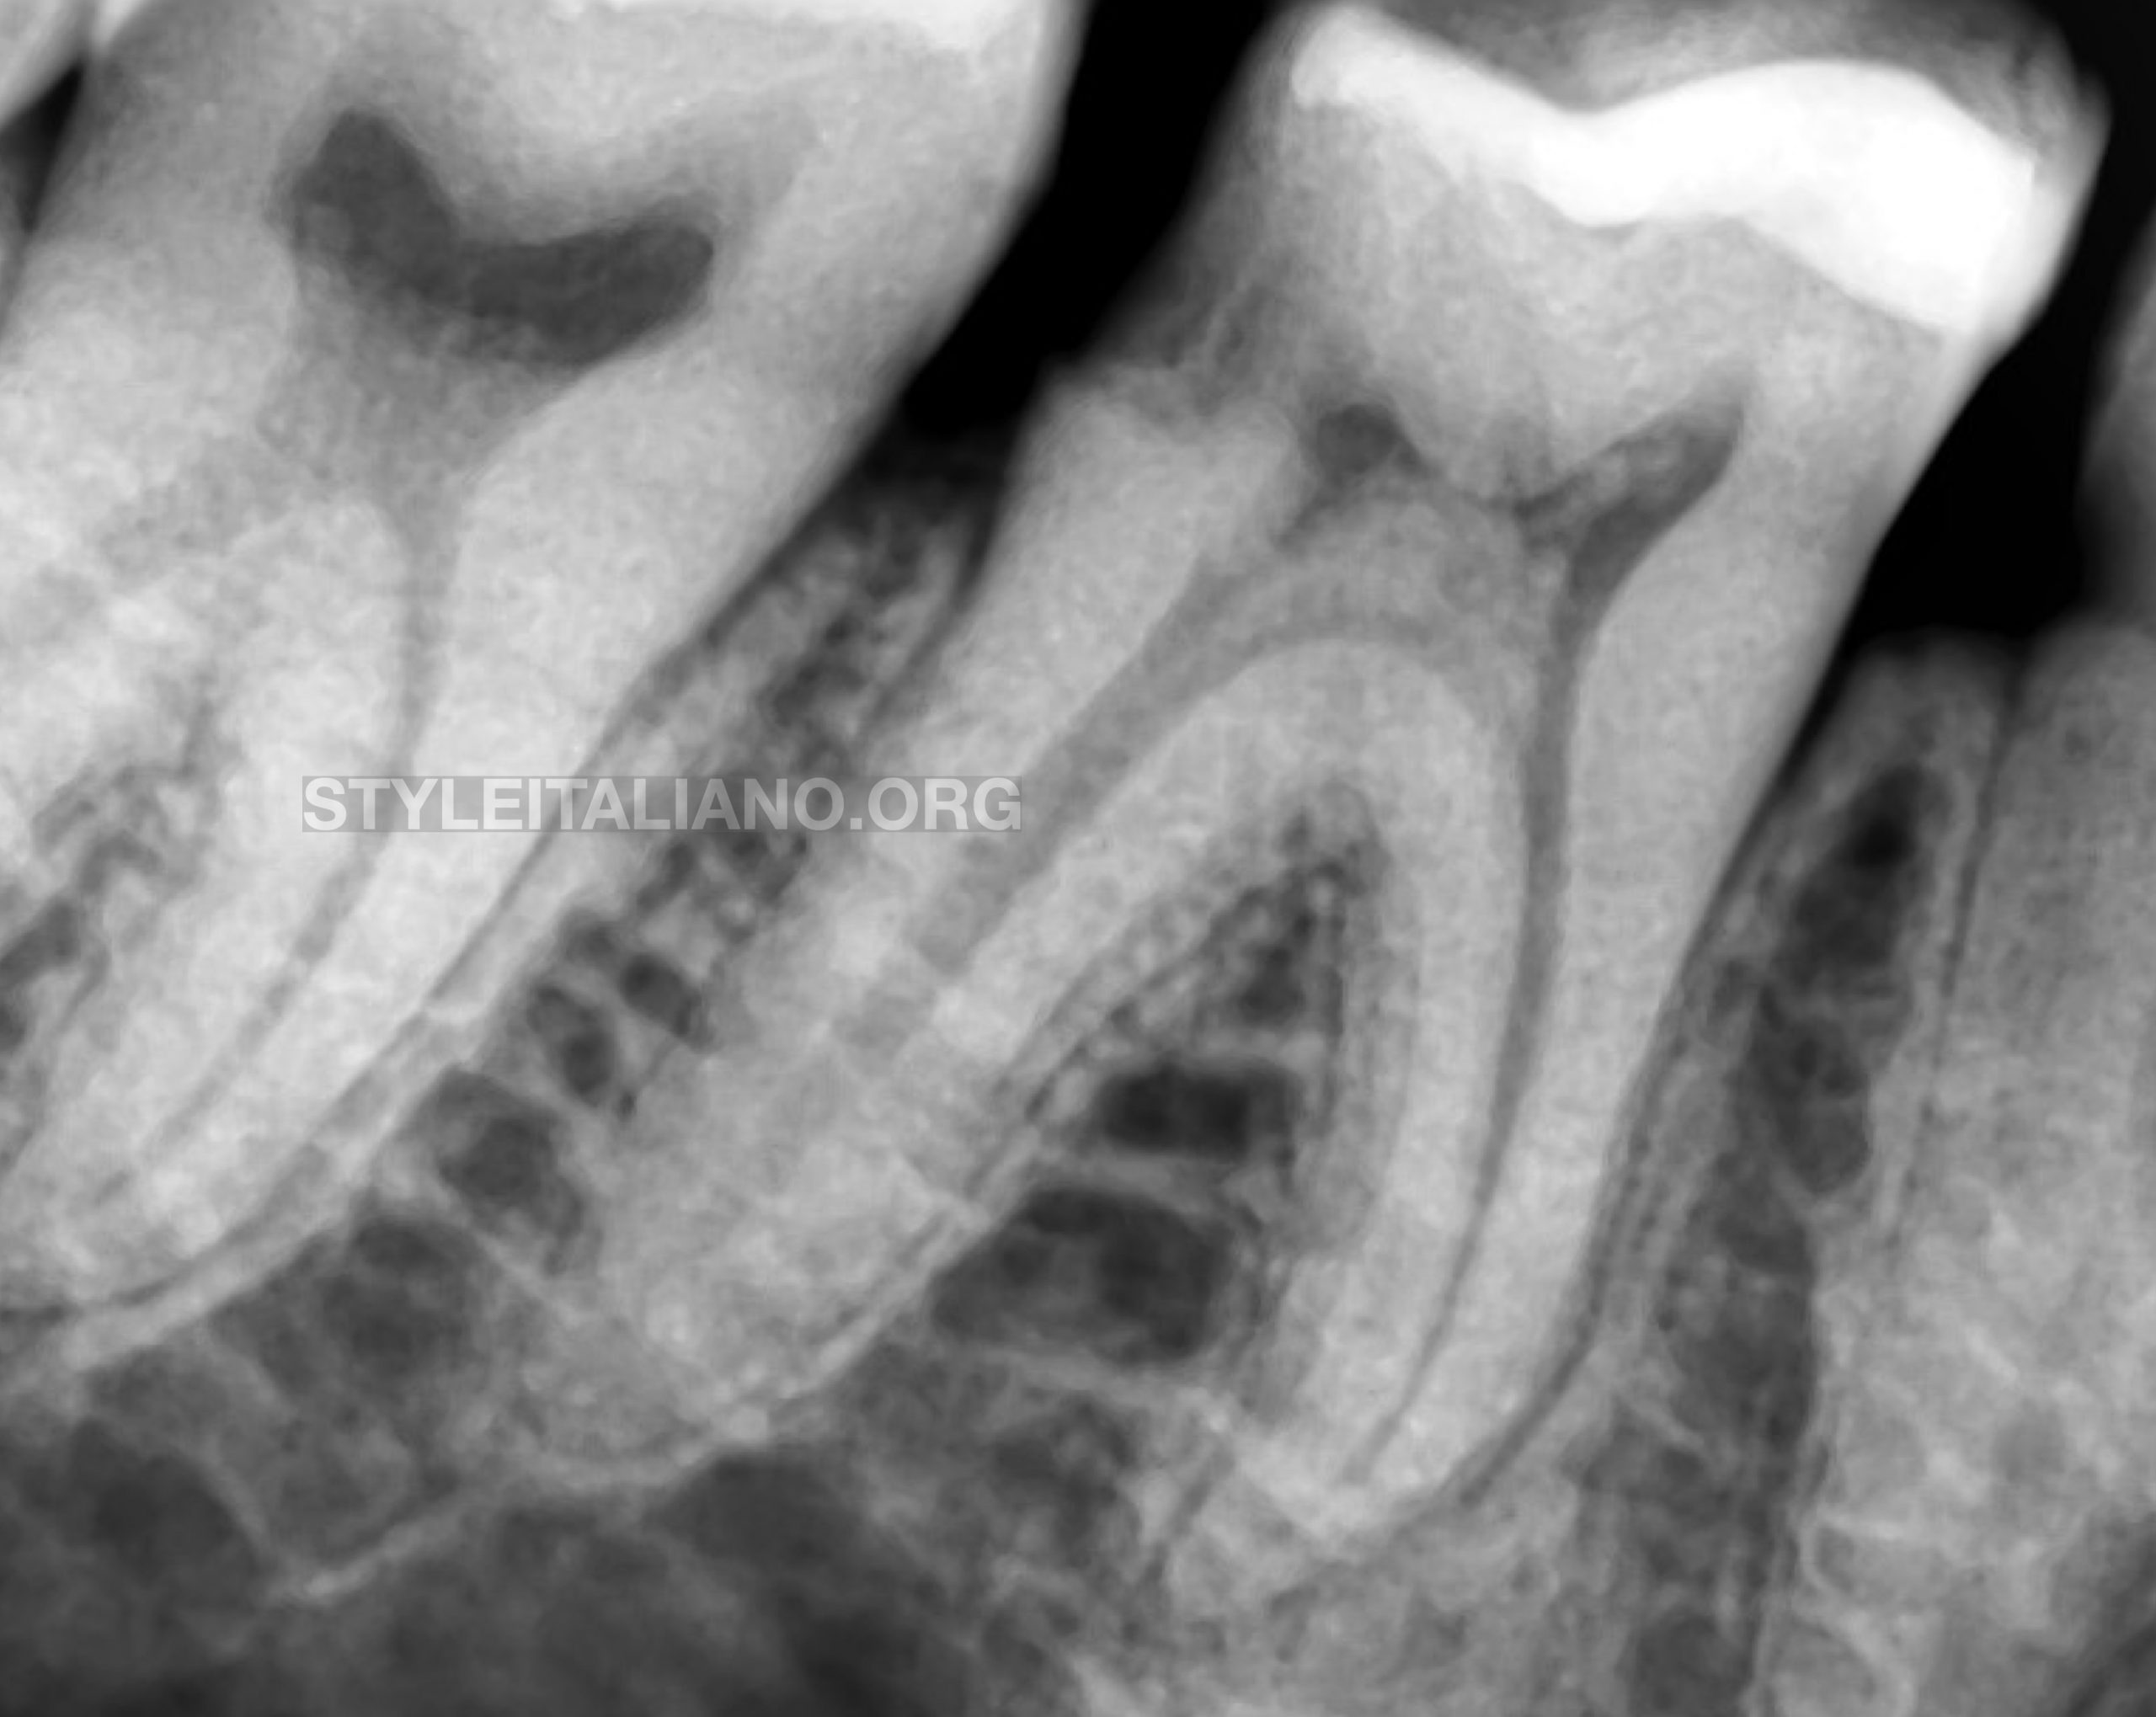 Endodontic management of a mandibular first molar with pulp stone obliterating  the floor of pulp chamber – a case report.